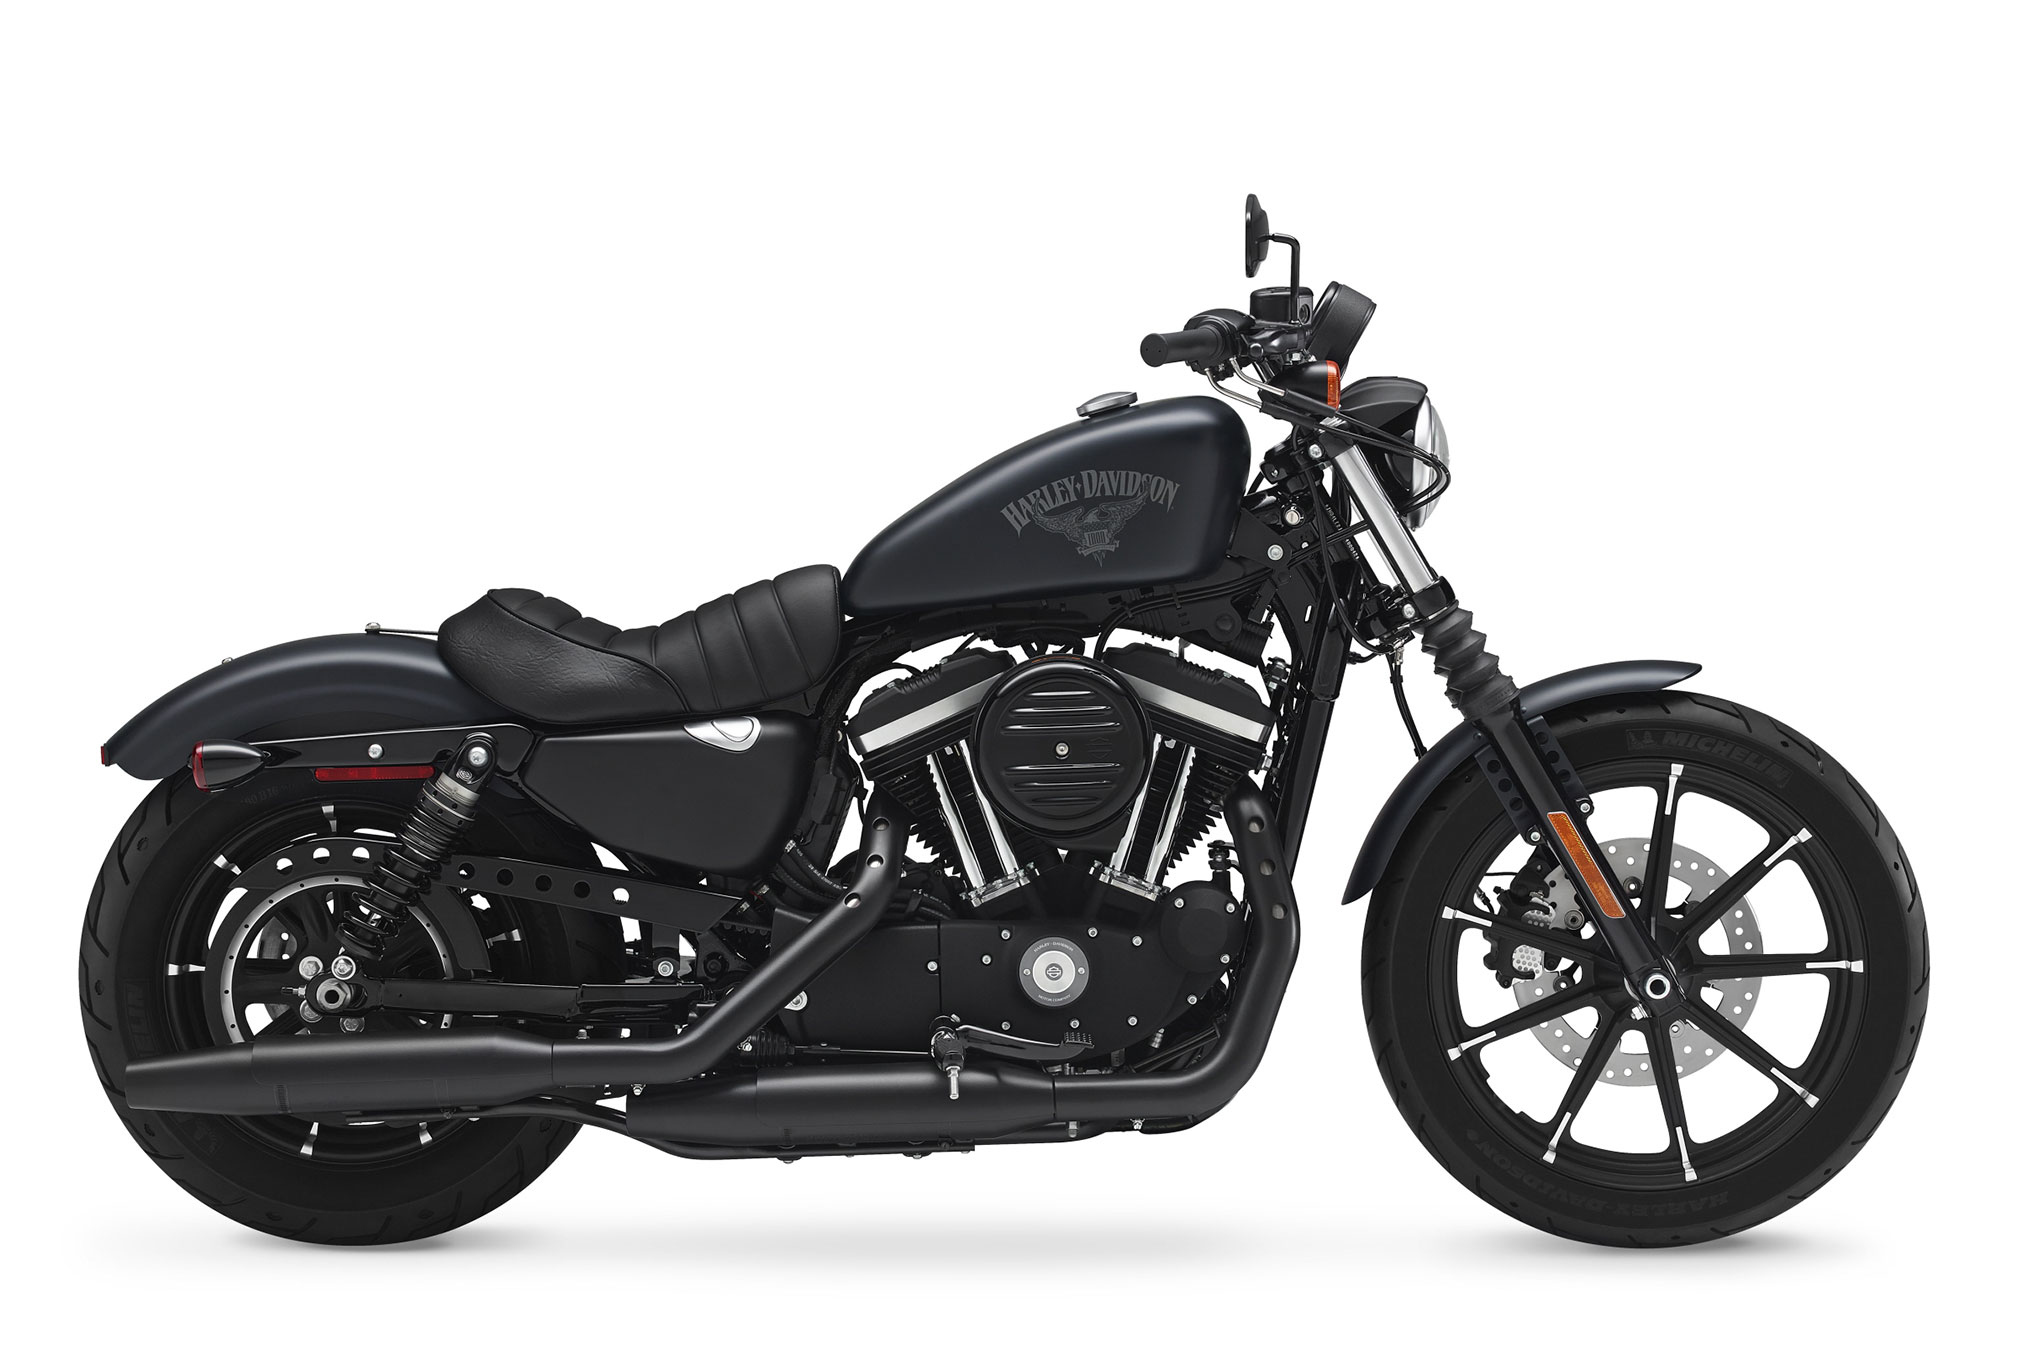 Photo 11 Harley Davidson Iron 883 2020 Motorcycle Picture Gallery Bikes4sale